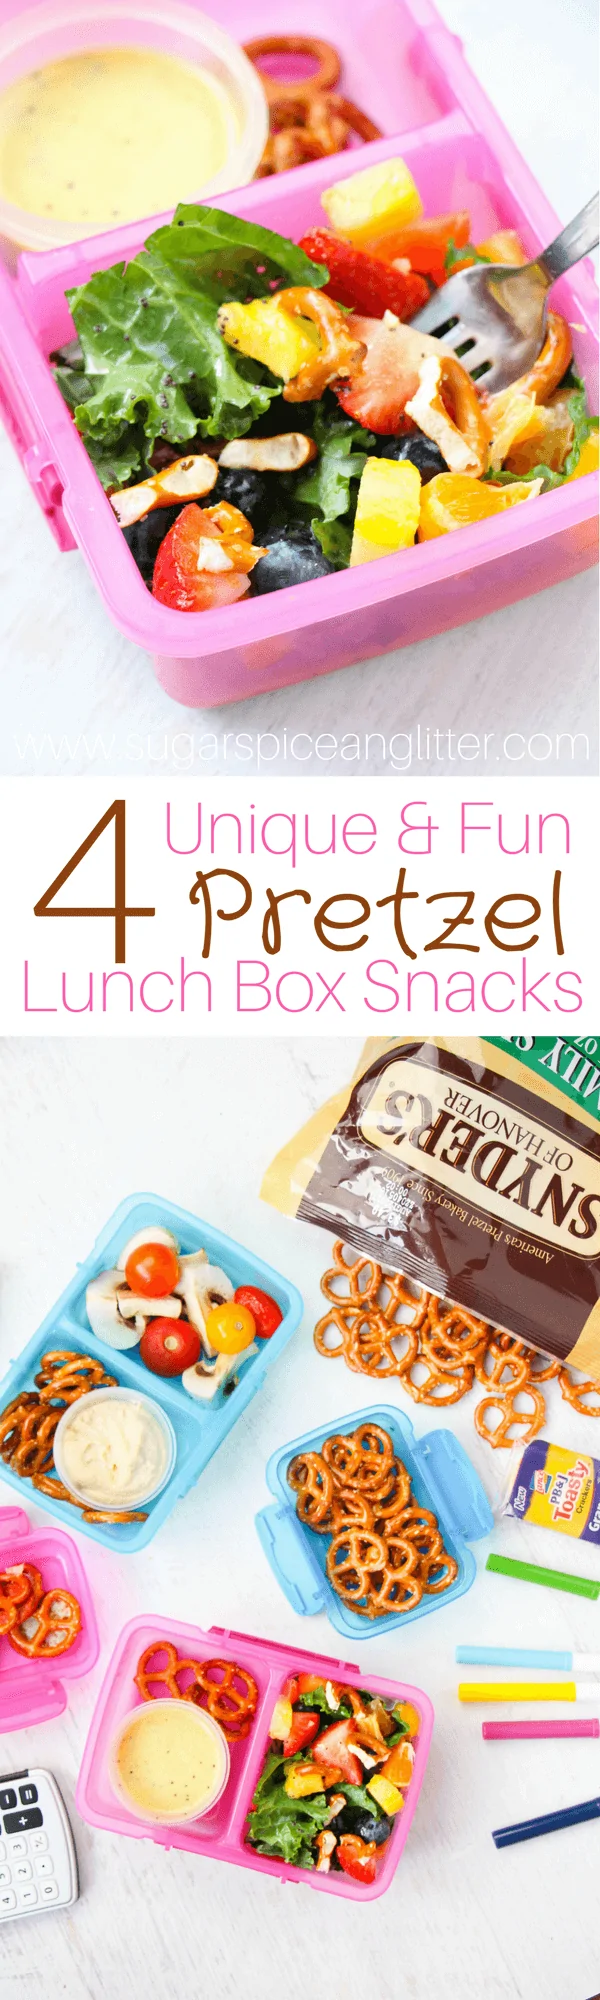 4+ Delicious Pretzel School Snacks - from a Rainbow Salad with Orange Poppyseed Dressing and Pretzels, to a Pizza Pretzel Sandwich, all of these recipes are lunch box ideas kids can make